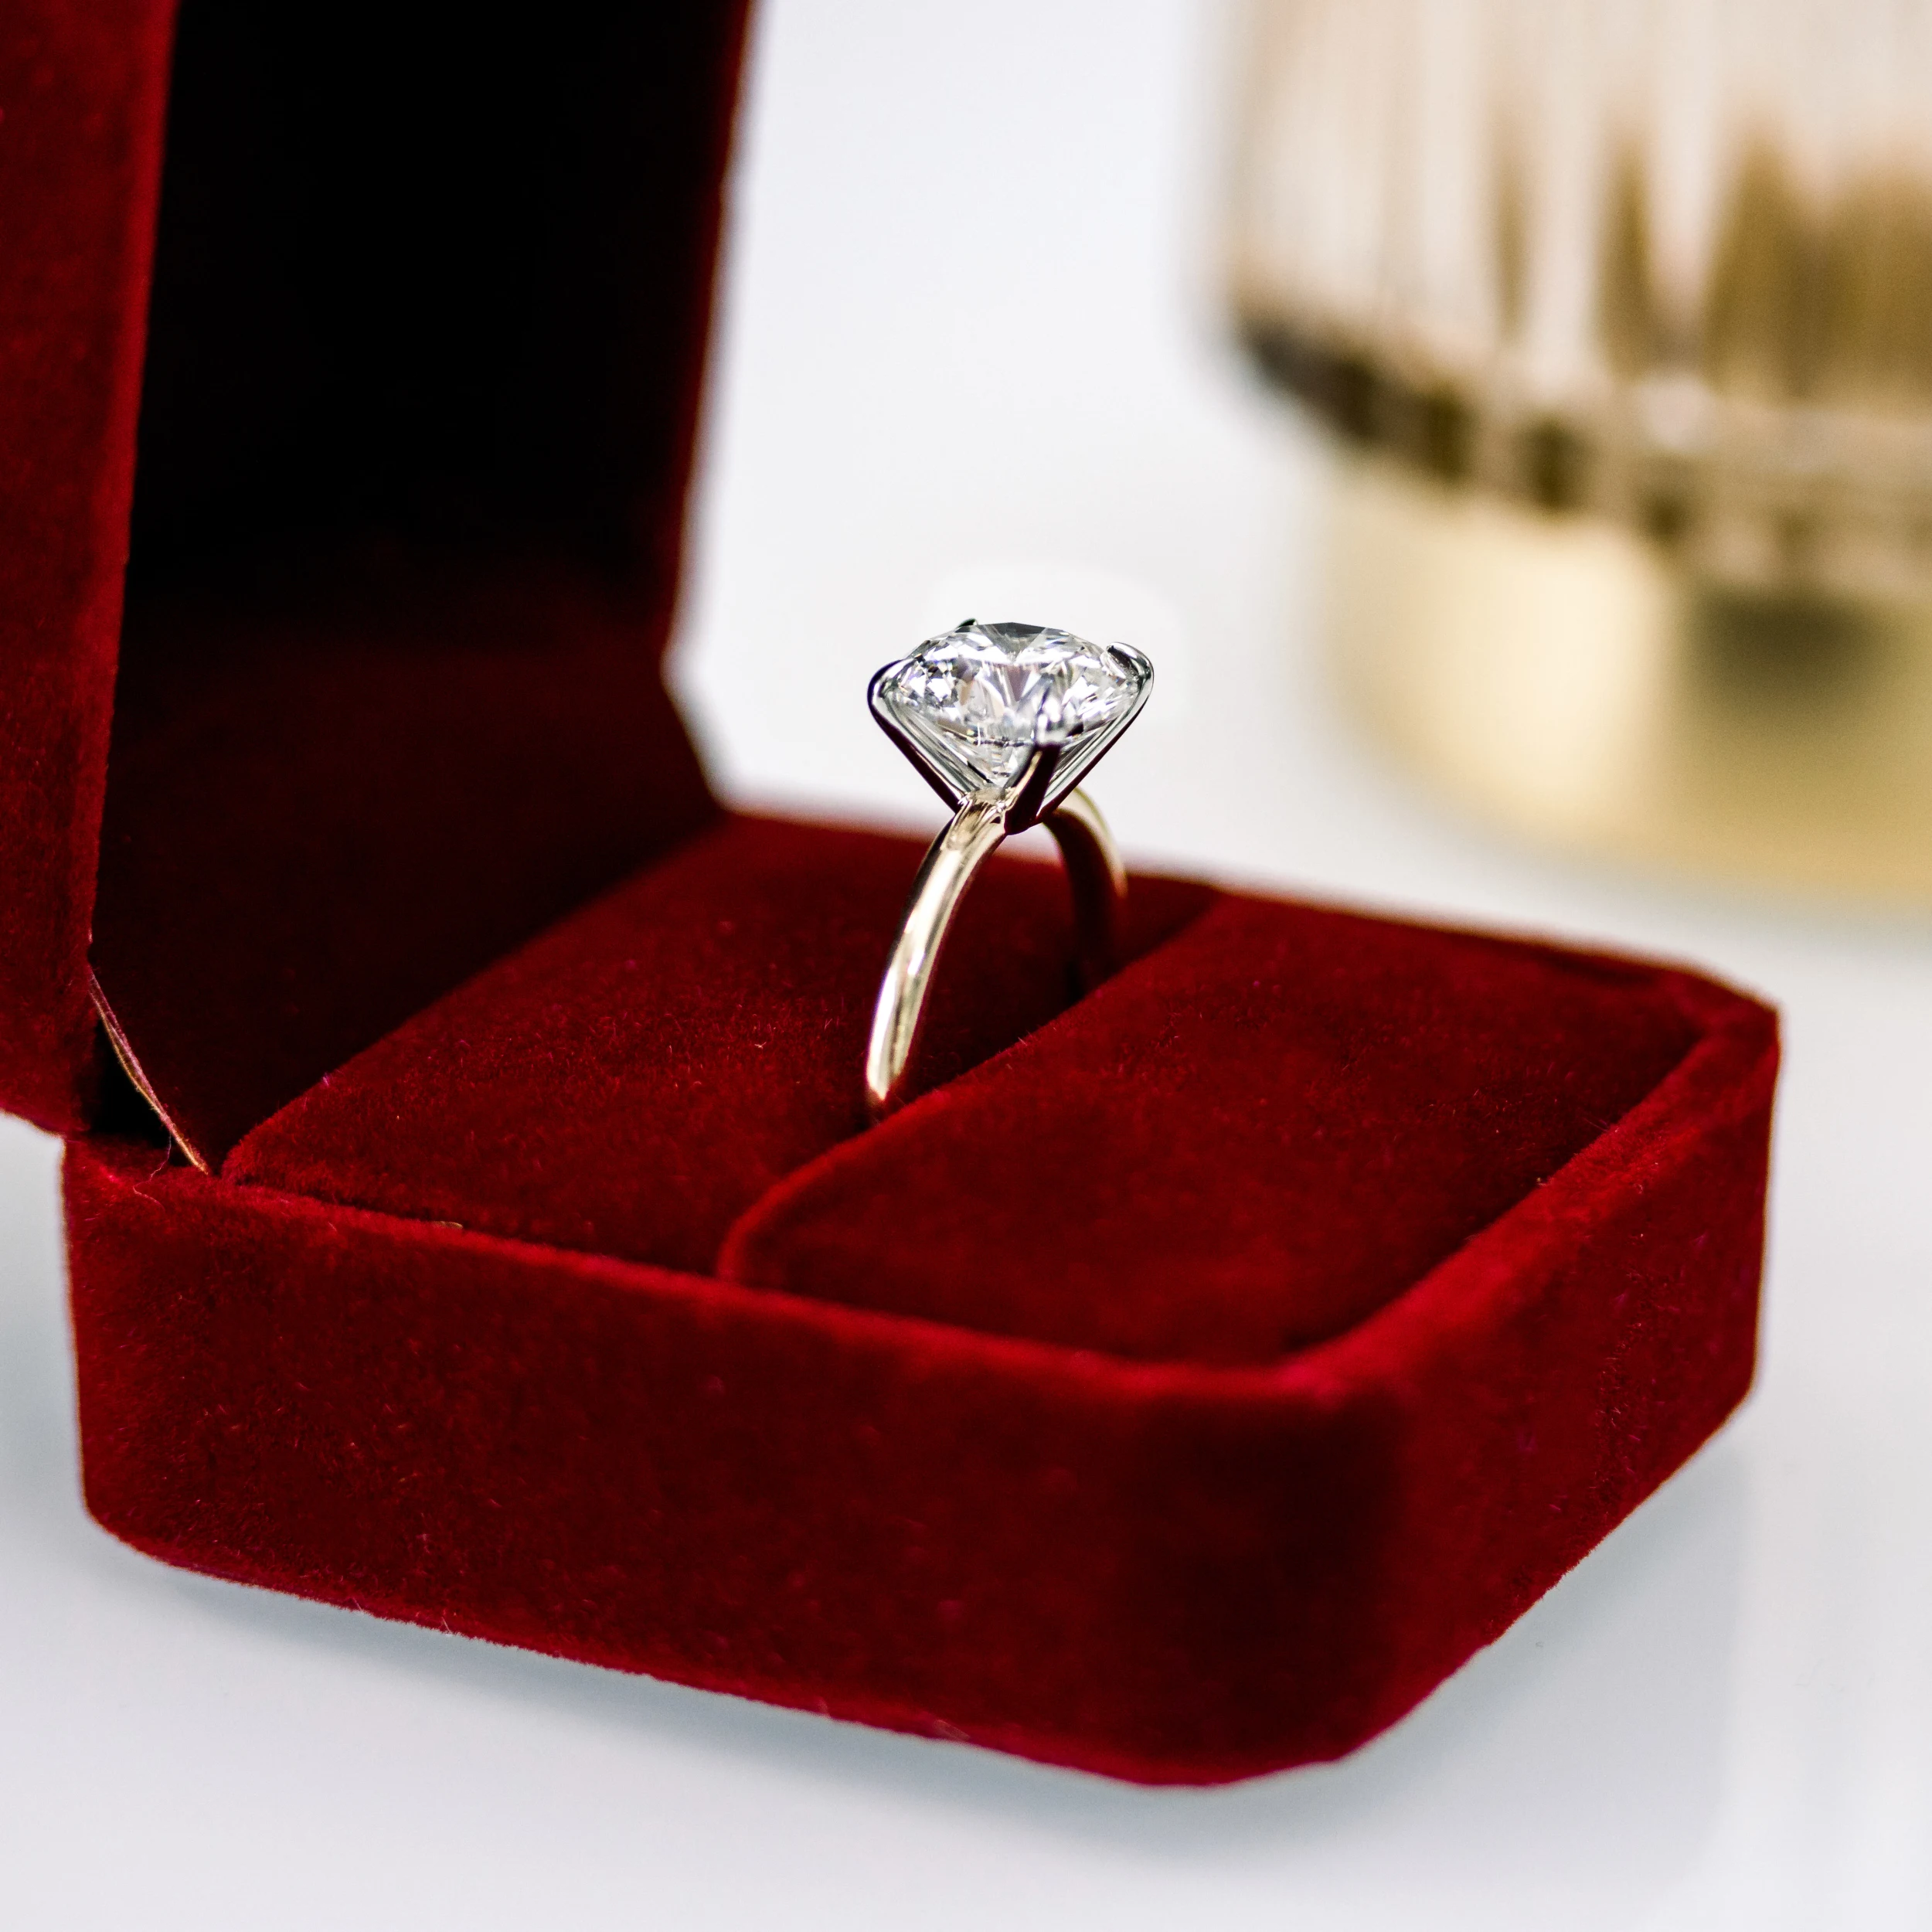 3.5 Carat Diamonds set in Platinum & Yellow Gold Round Classic Four Prong Solitaire (Side View)